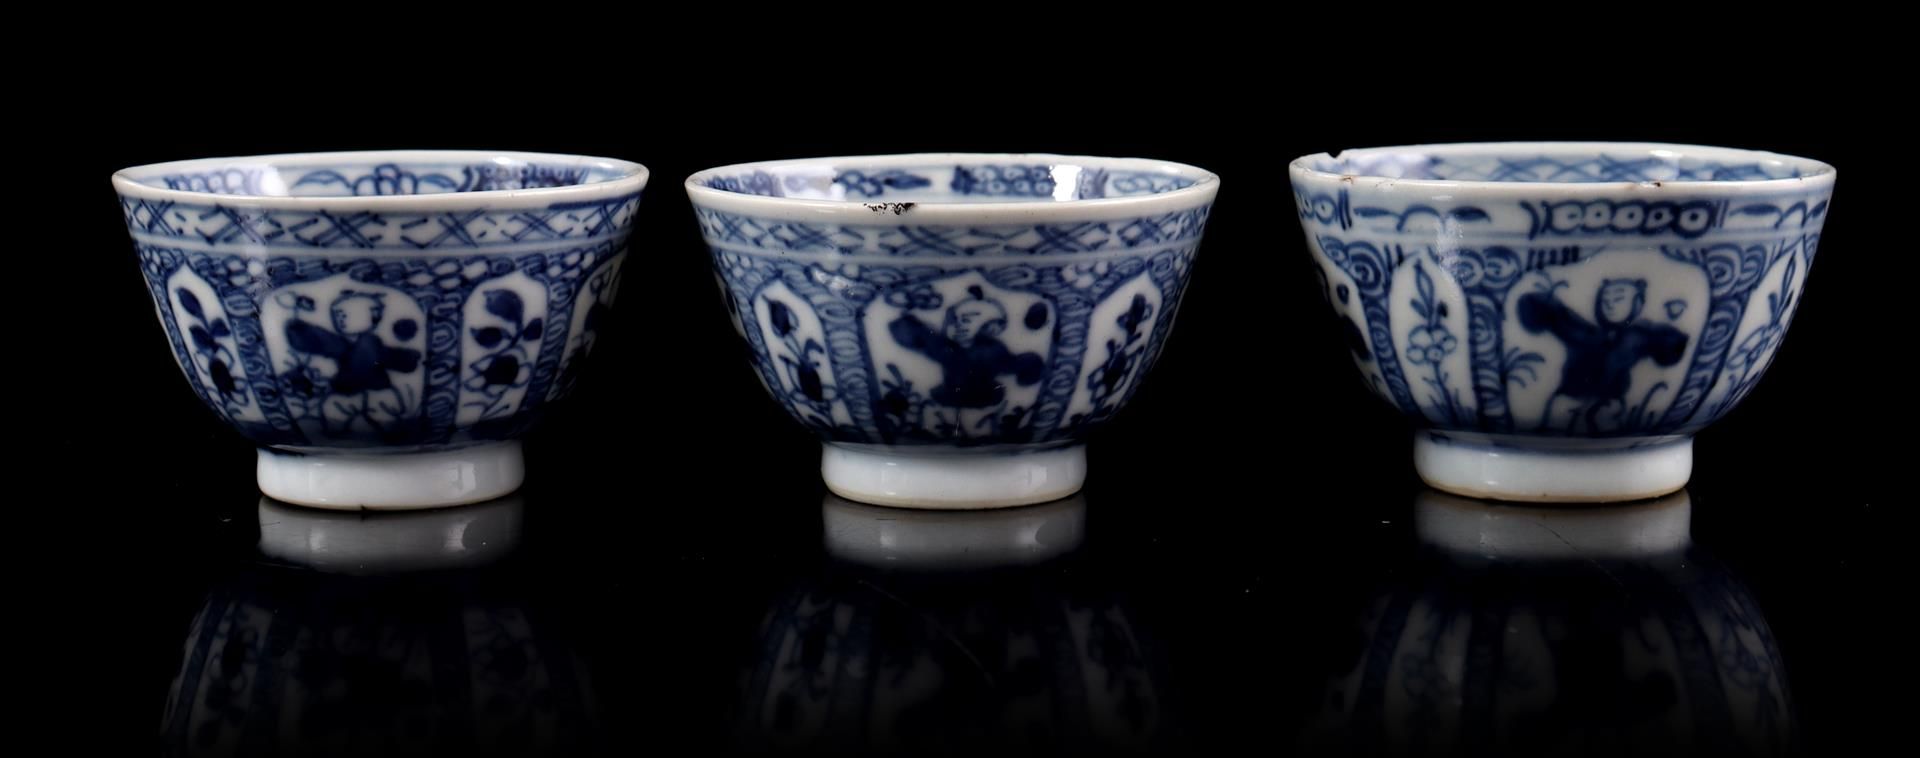 3 porcelain cups and saucers, Qianlong - Image 4 of 7